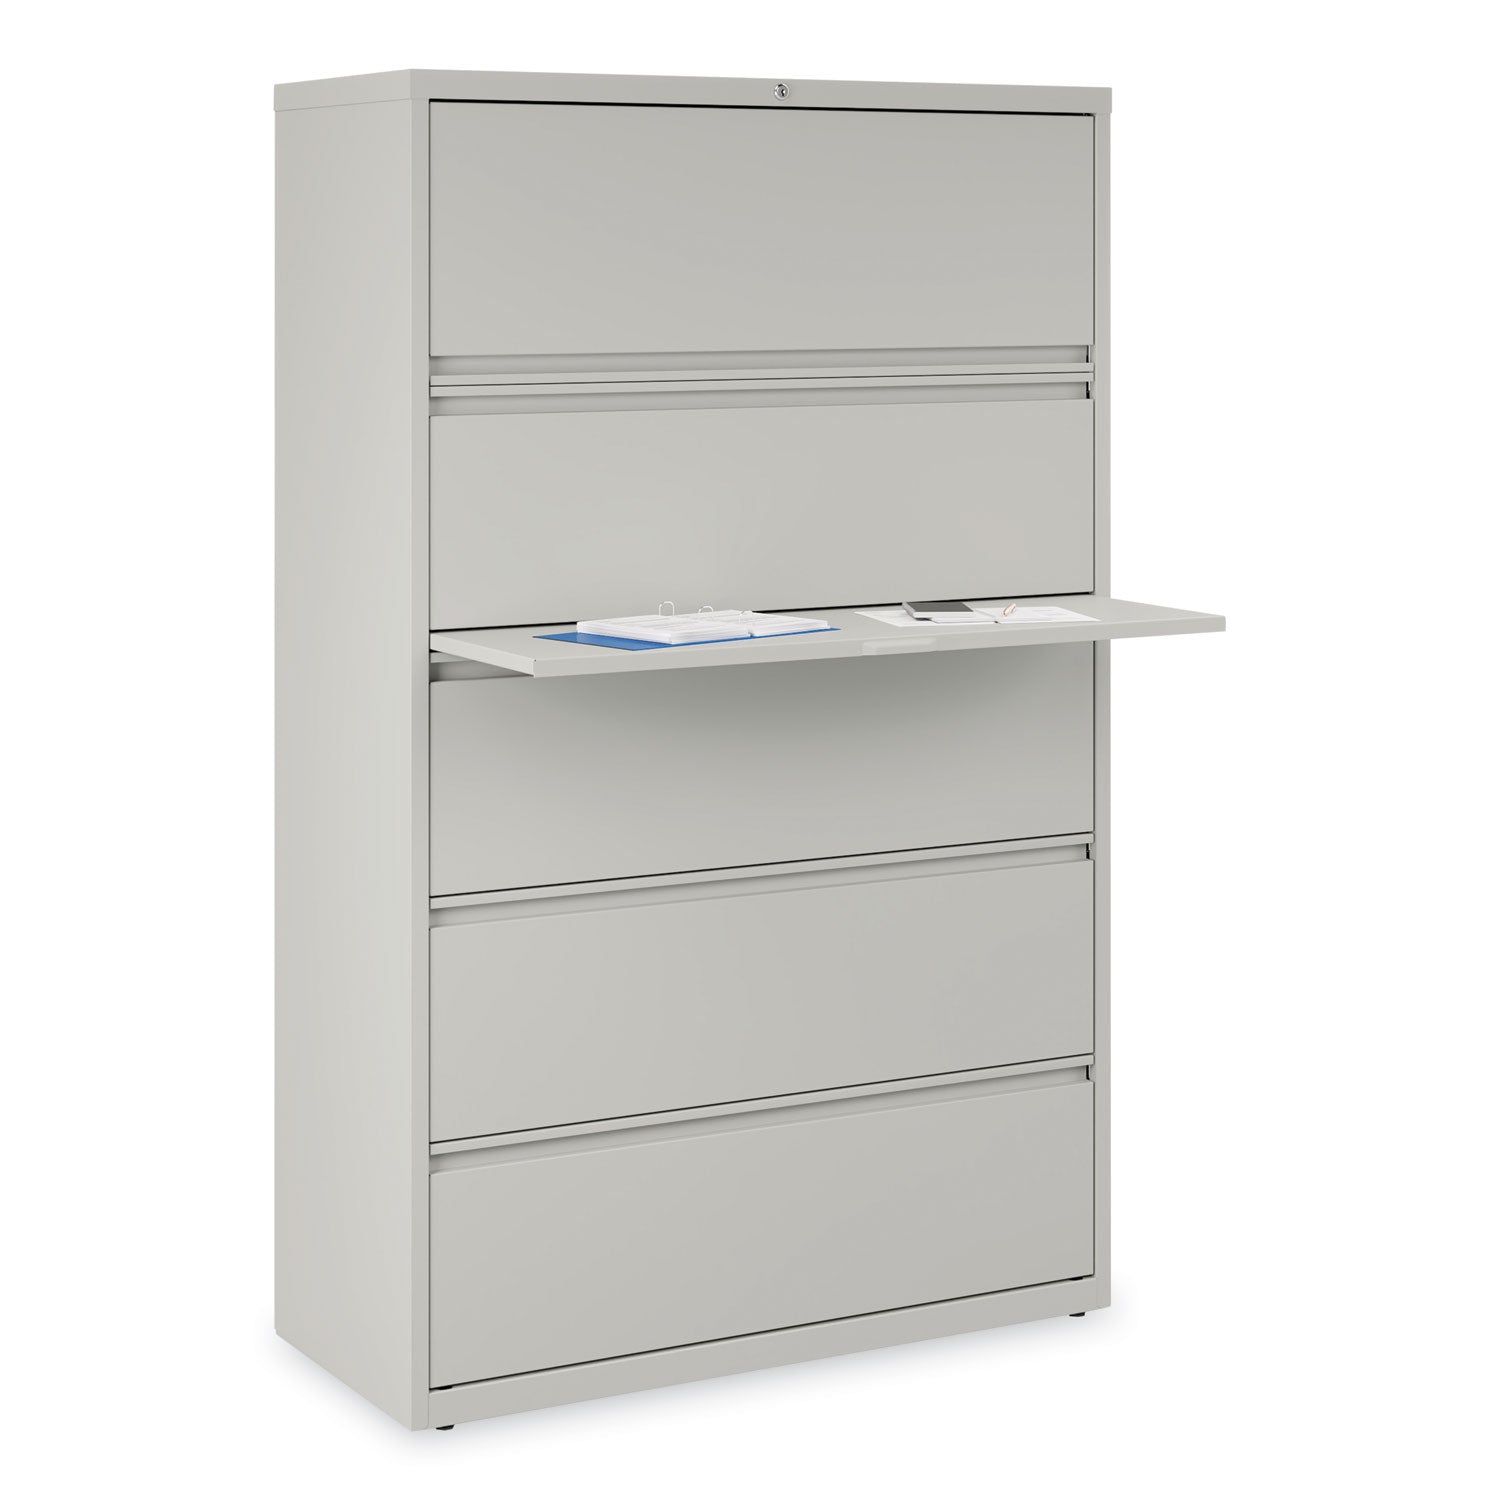 lateral-file-5-legal-letter-a4-a5-size-file-drawers-1-roll-out-posting-shelf-light-gray-42-x-1863-x-6763_alehlf4267lg - 8